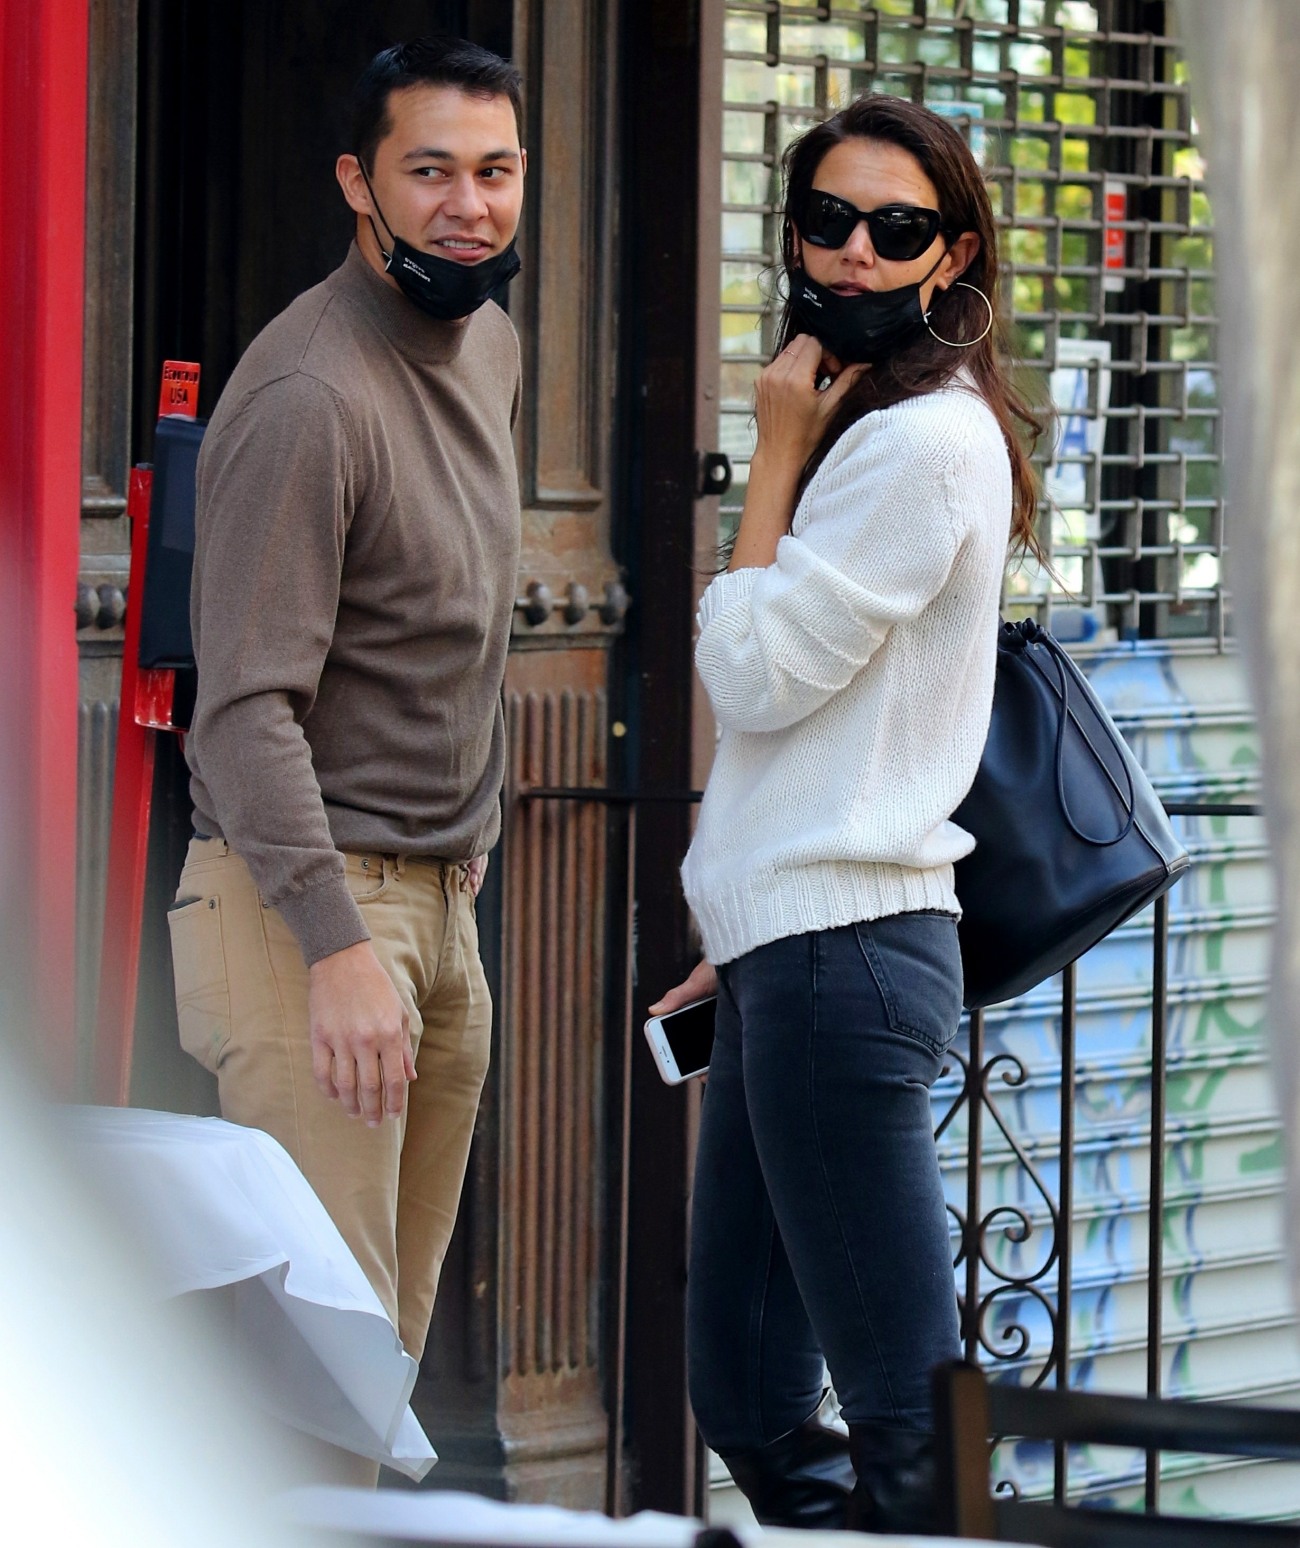 Katie Holmes and Emilio Vitolo are all smiles as they continue another steamy make-out session outside his restaurant in NYC